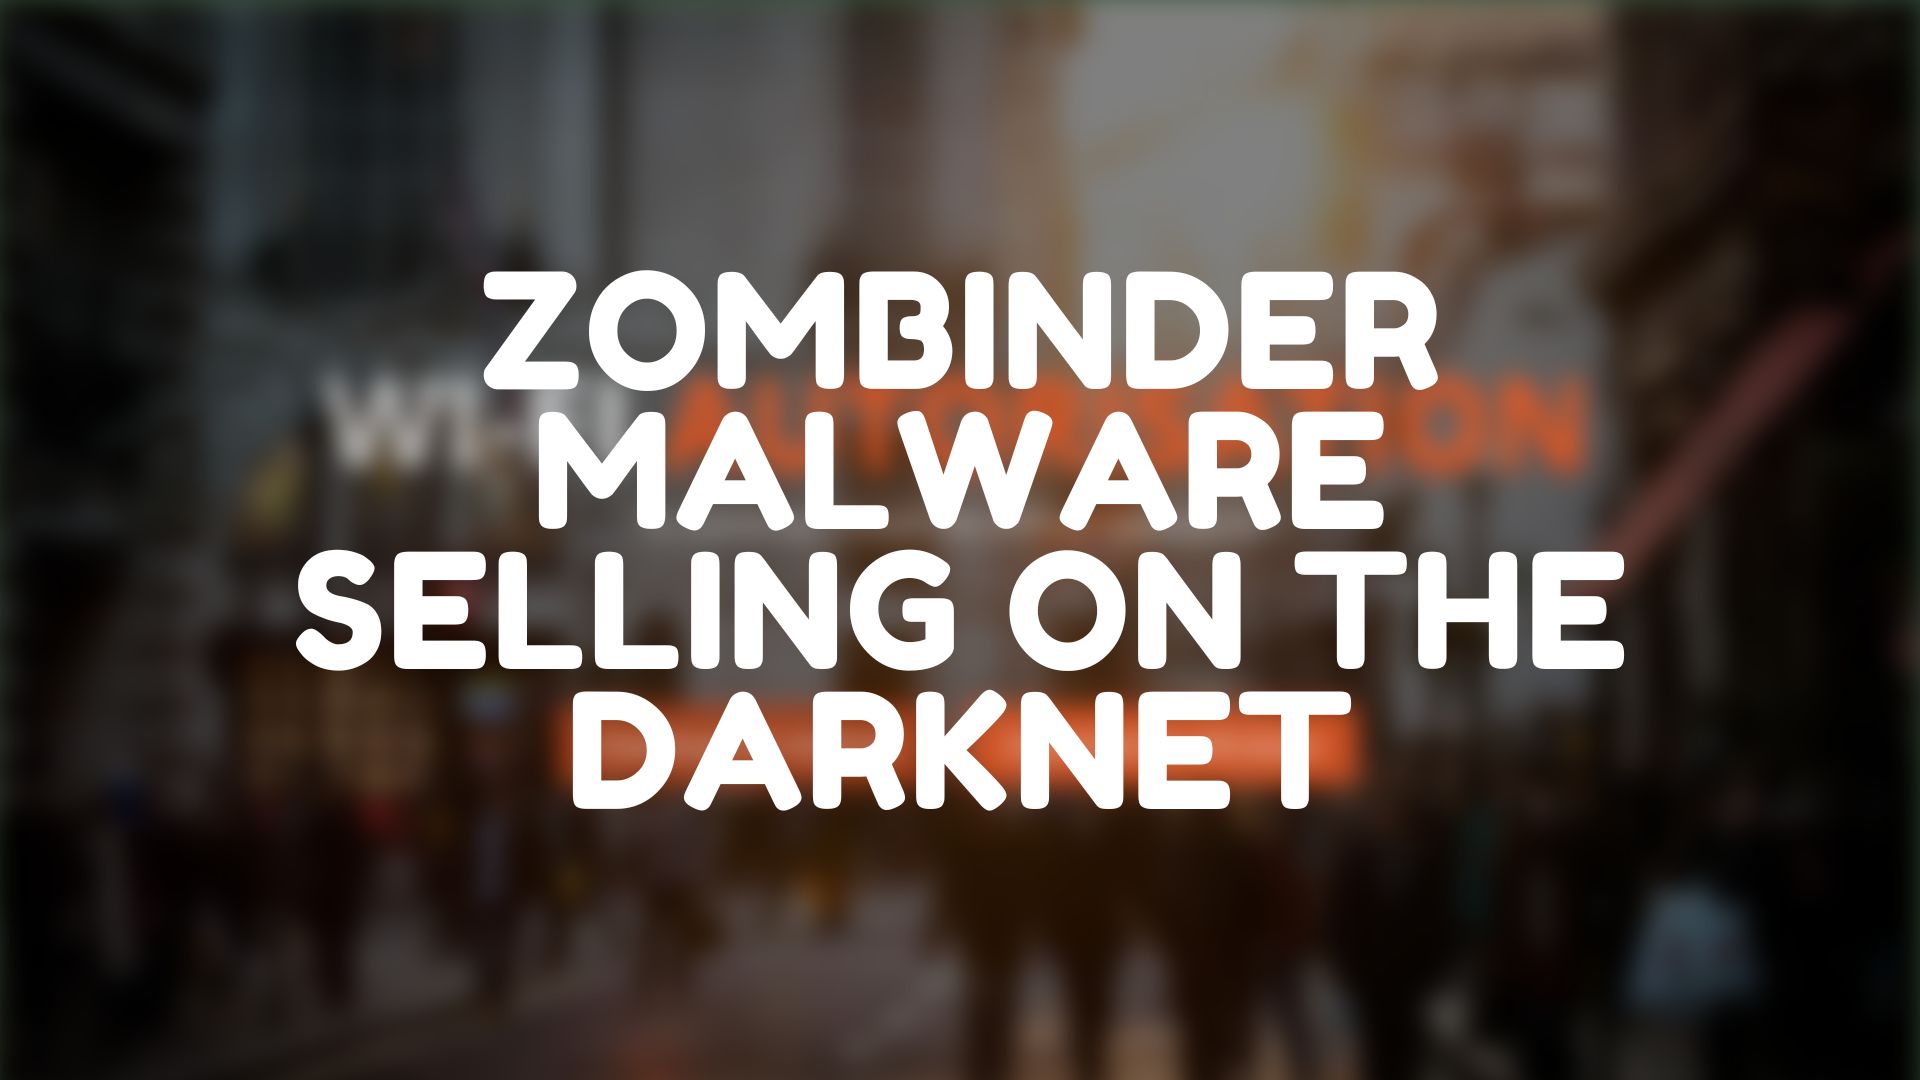 ZOMBINDER MALWARE SELLING ON THE DARKNET